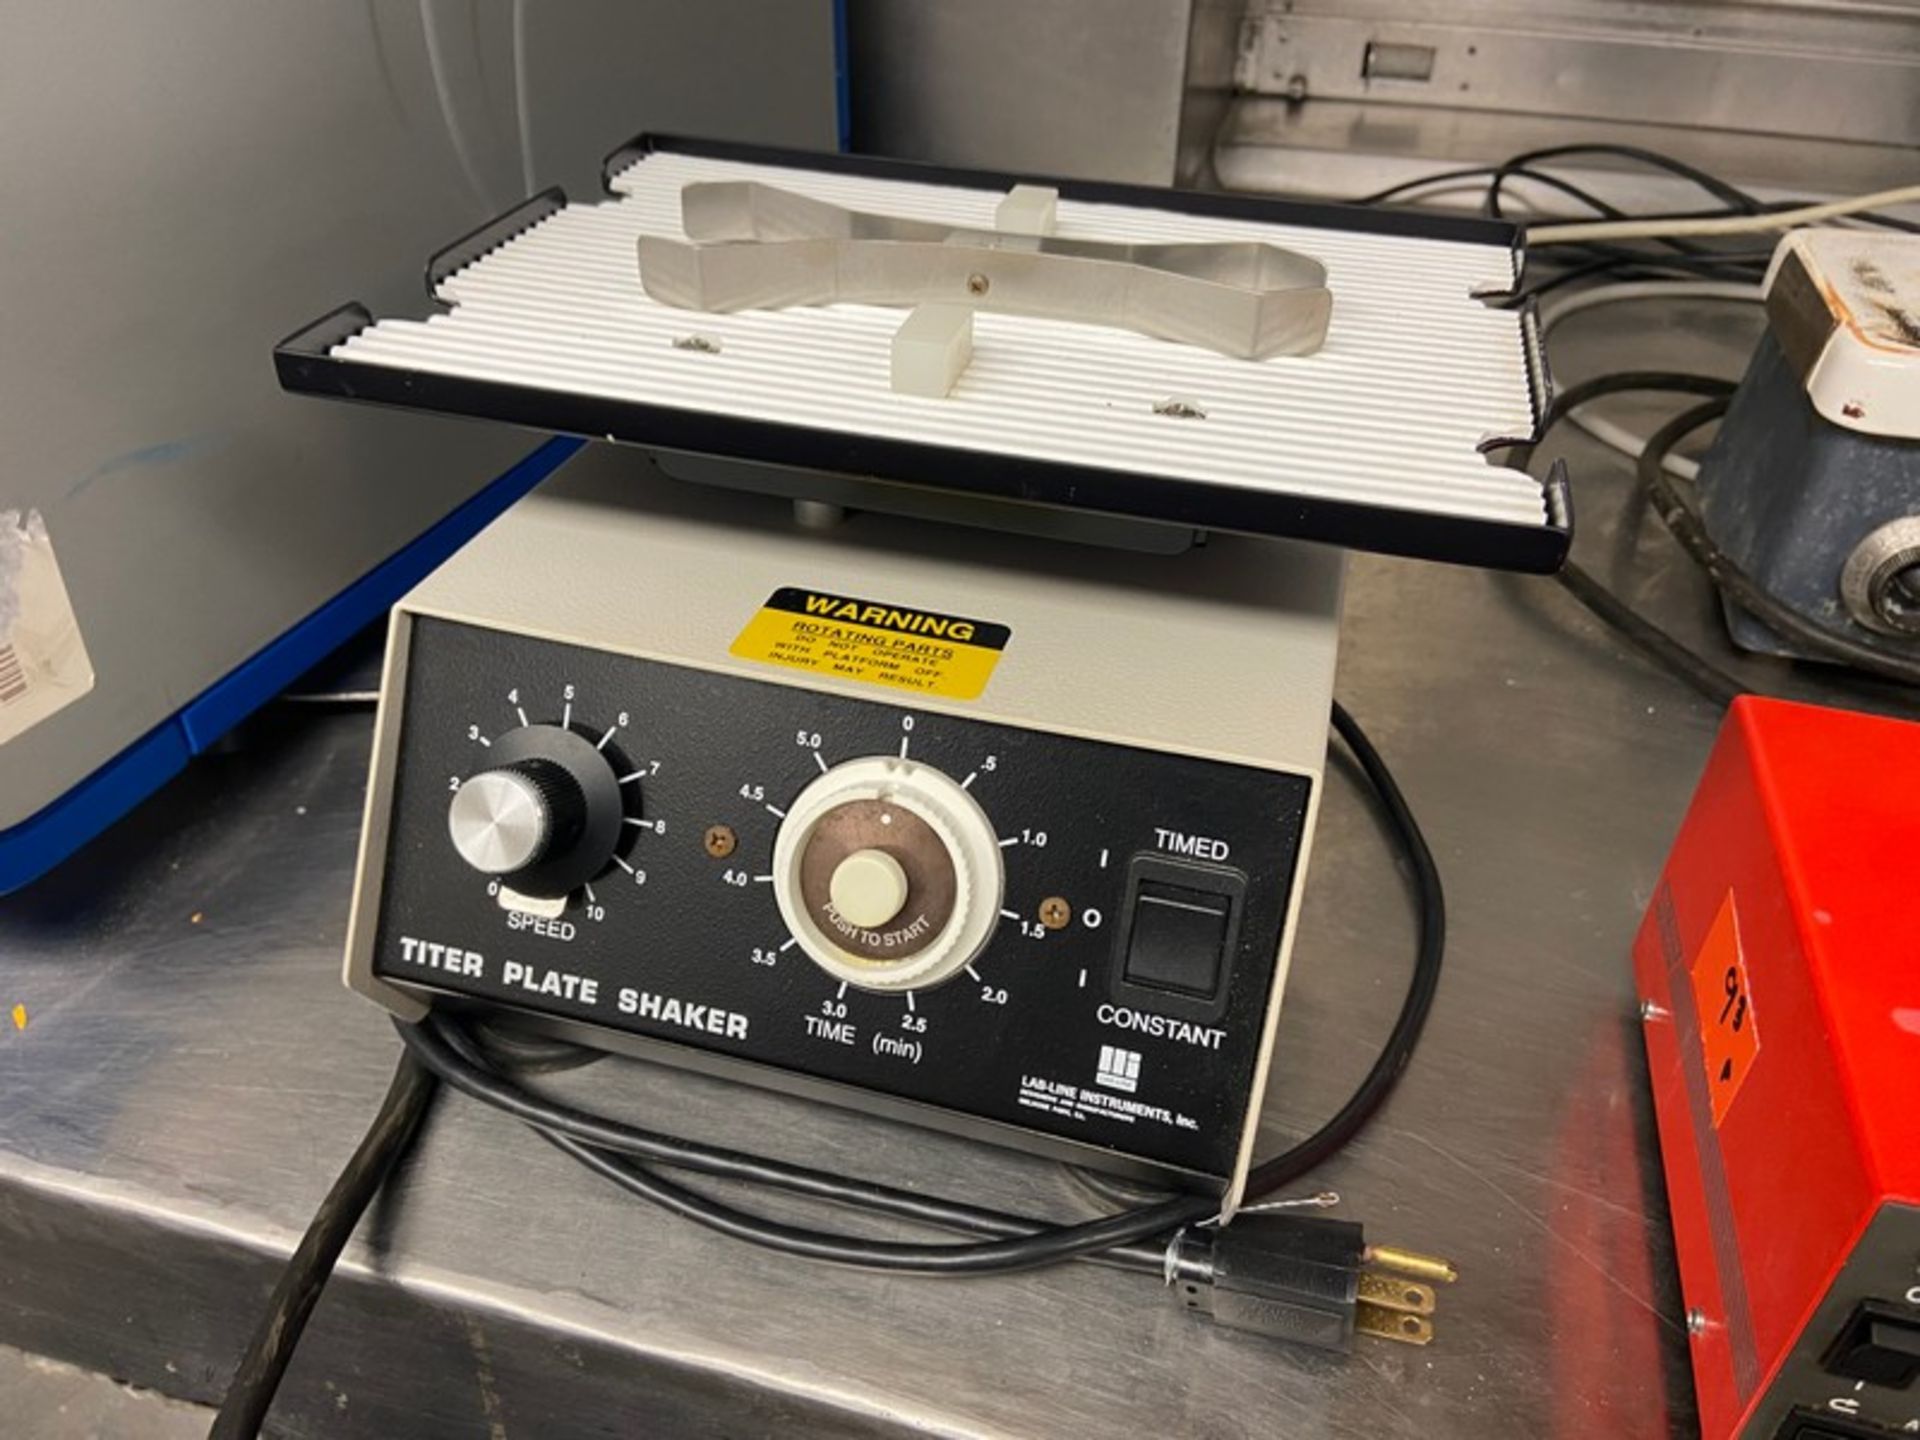 Lab Line Instruments Inc. Titer Plate Shaker, M/N 4625, S/N 0399-1066, 120 Volts (LOCATED IN-FOR